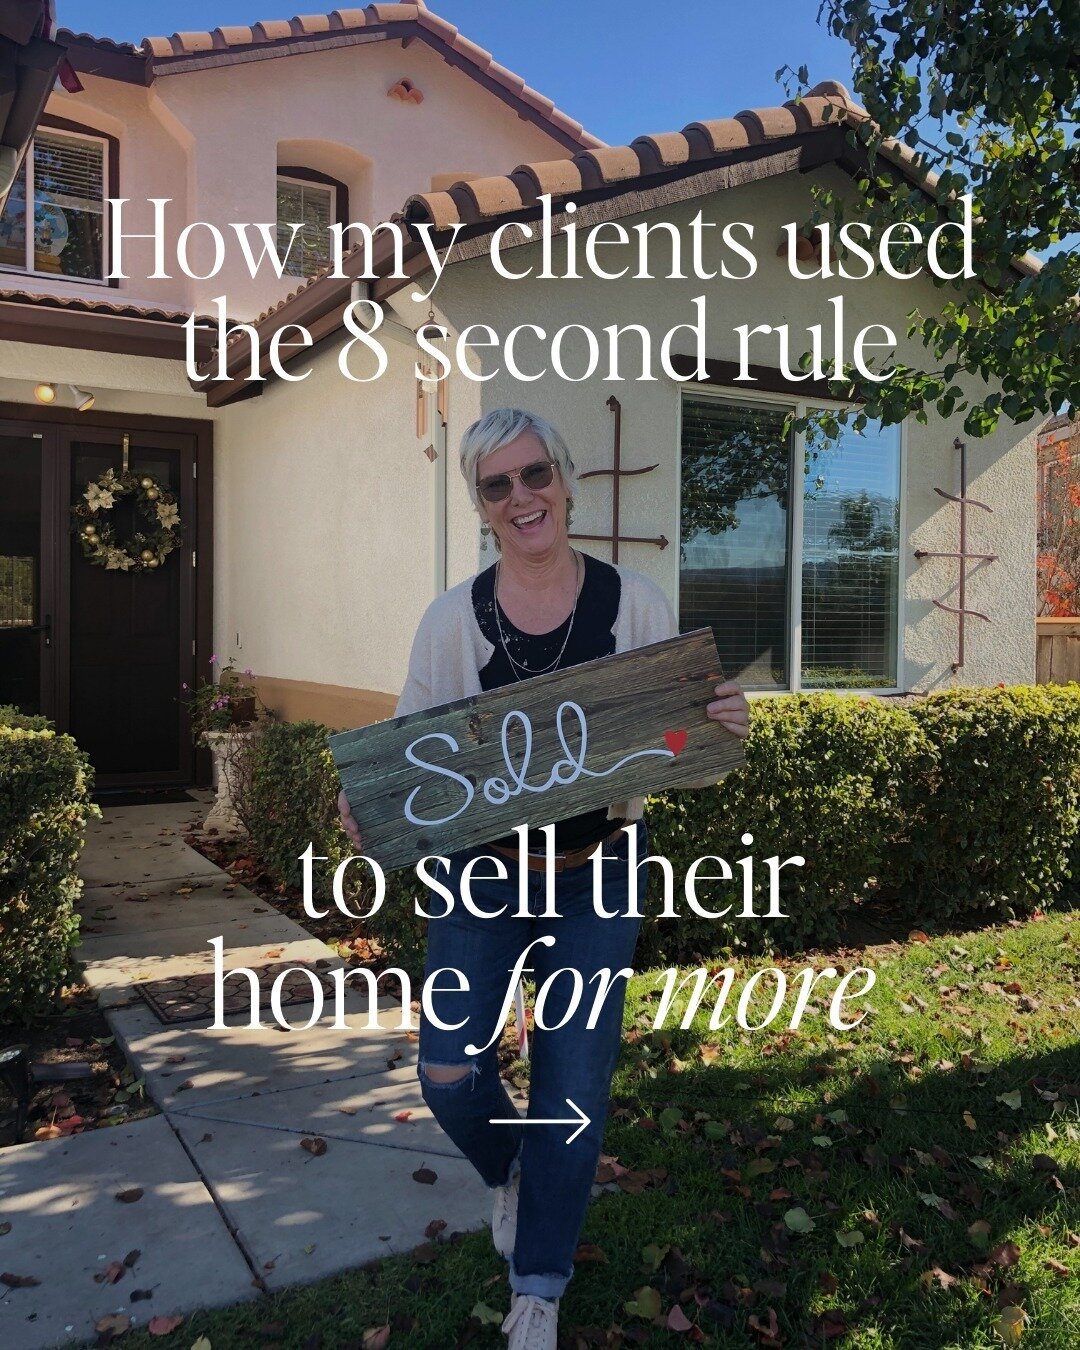 8 seconds....
That's the amount of time you have to make an impression on a potential buyer.
This is what my clients focused on to ensure they hit the mark from the get-go.

They got to work on curb appeal

With winter winding down, it was time to sp